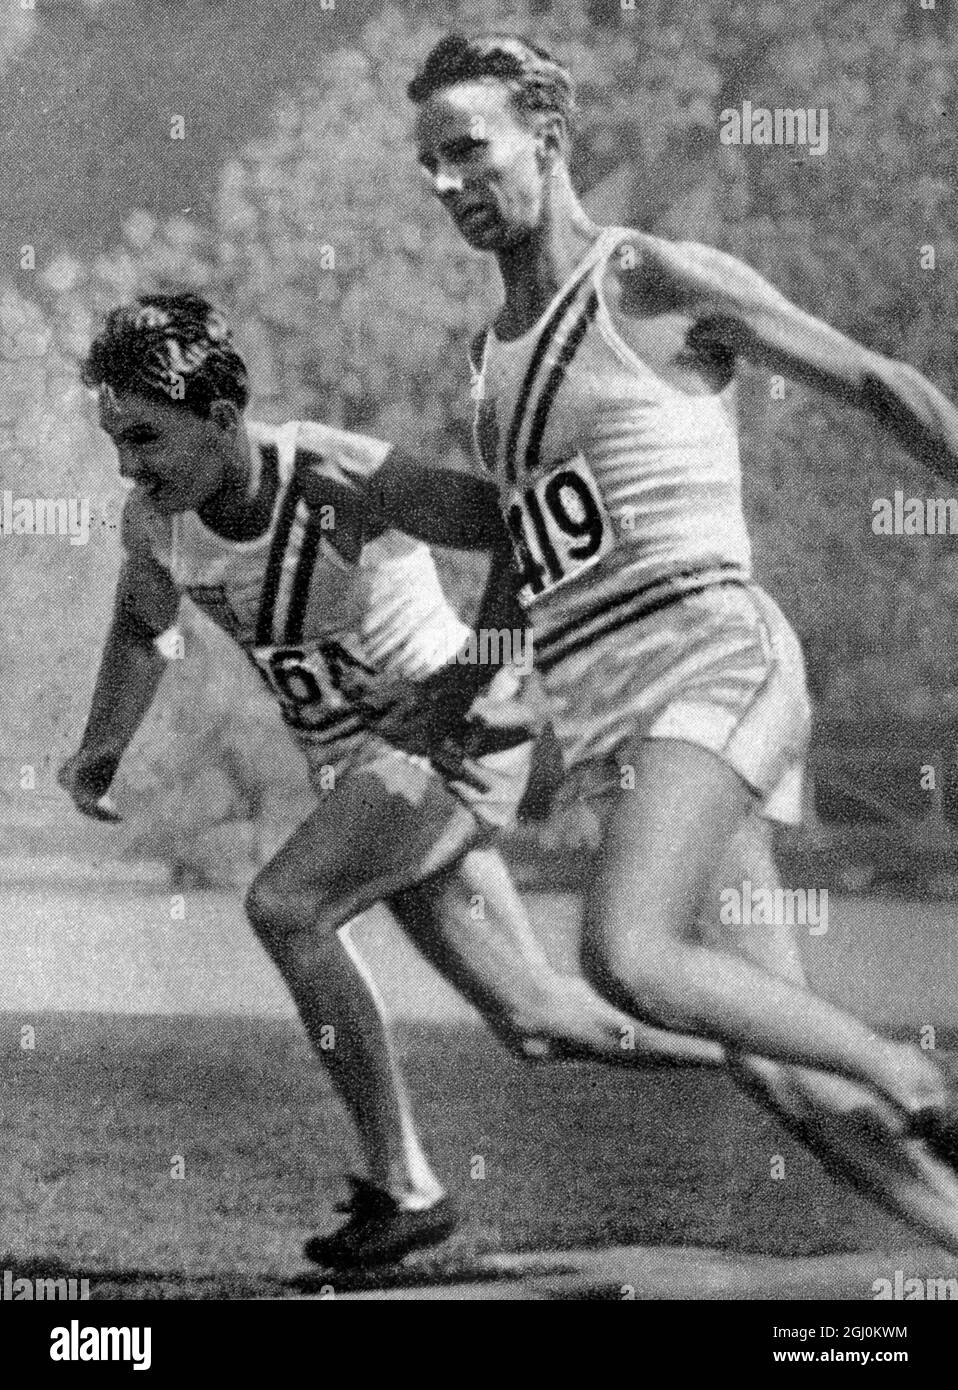 X Olympiad, Los Angeles, August 1932. Frank Wykoff & Hector Dyer Frank C. Wykoff Olympic GOLD Medalist U. S. A. 400 Meter Relay Team Track & Field Stock Photo